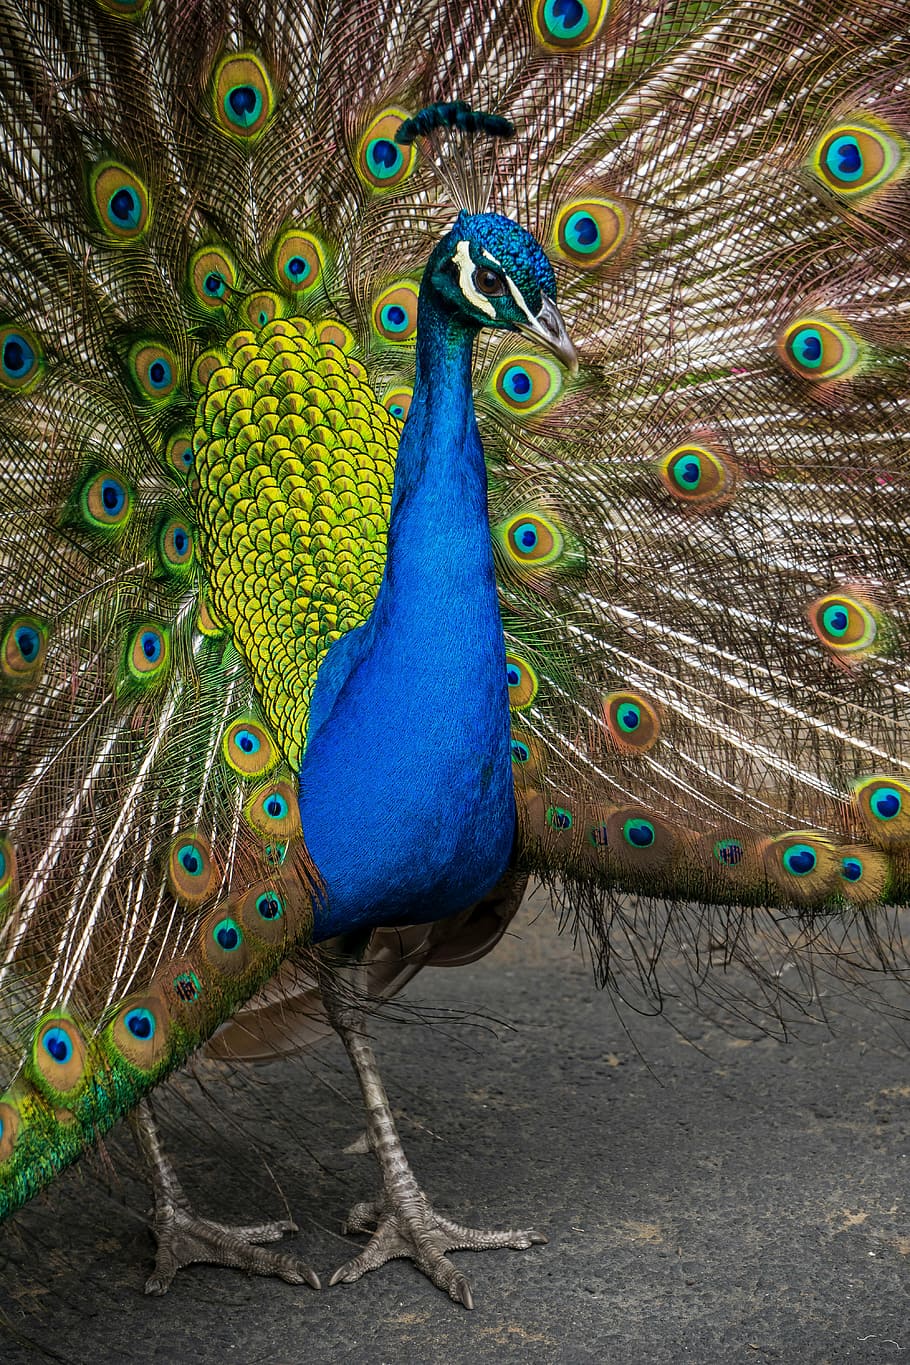 blue peacock, peafowl, peacock, colorful, feather, bird, animal, zoo, wildlife, nature